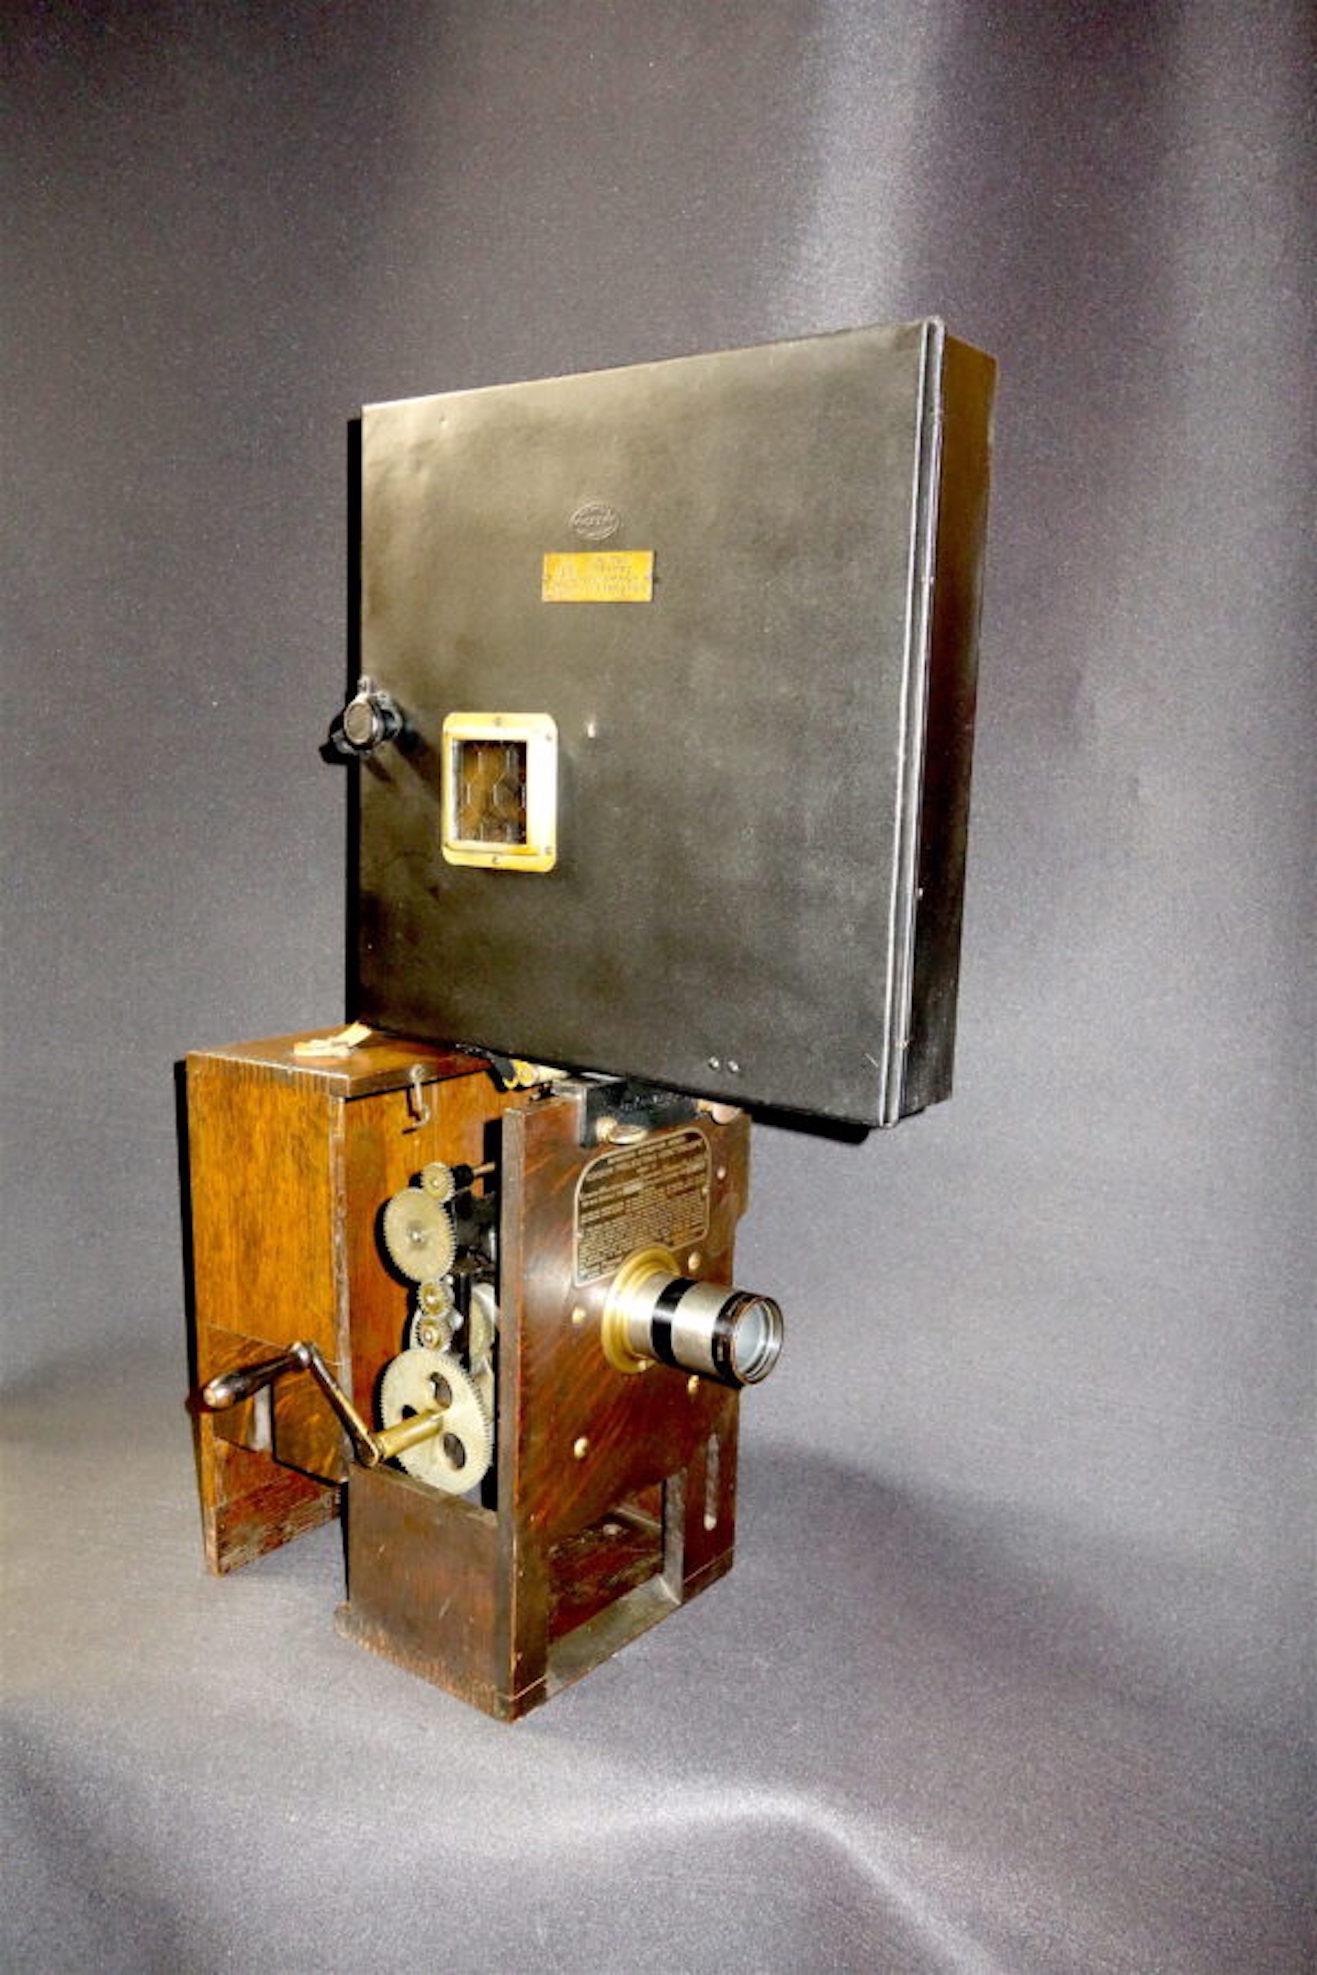 Submitted for your consideration is this 1897 designed & patented, Circa 1910 built, Edison Projecting Kinetoscope.

This circa 1910 Improved Exhibition Model 35mm projection machine represents  one of the most classic yet refined (improved) 35mm